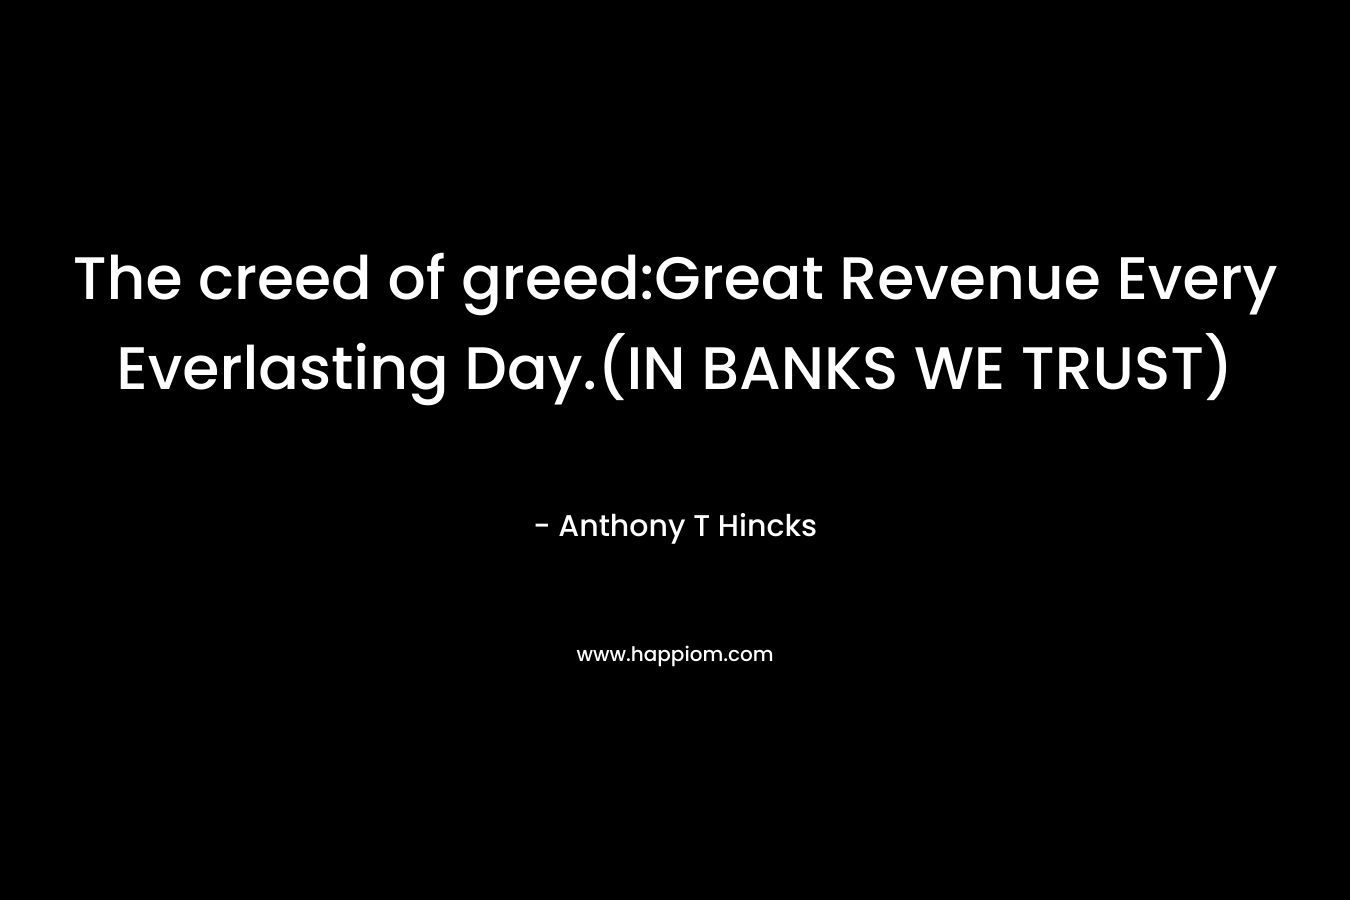 The creed of greed:Great Revenue Every Everlasting Day.(IN BANKS WE TRUST)